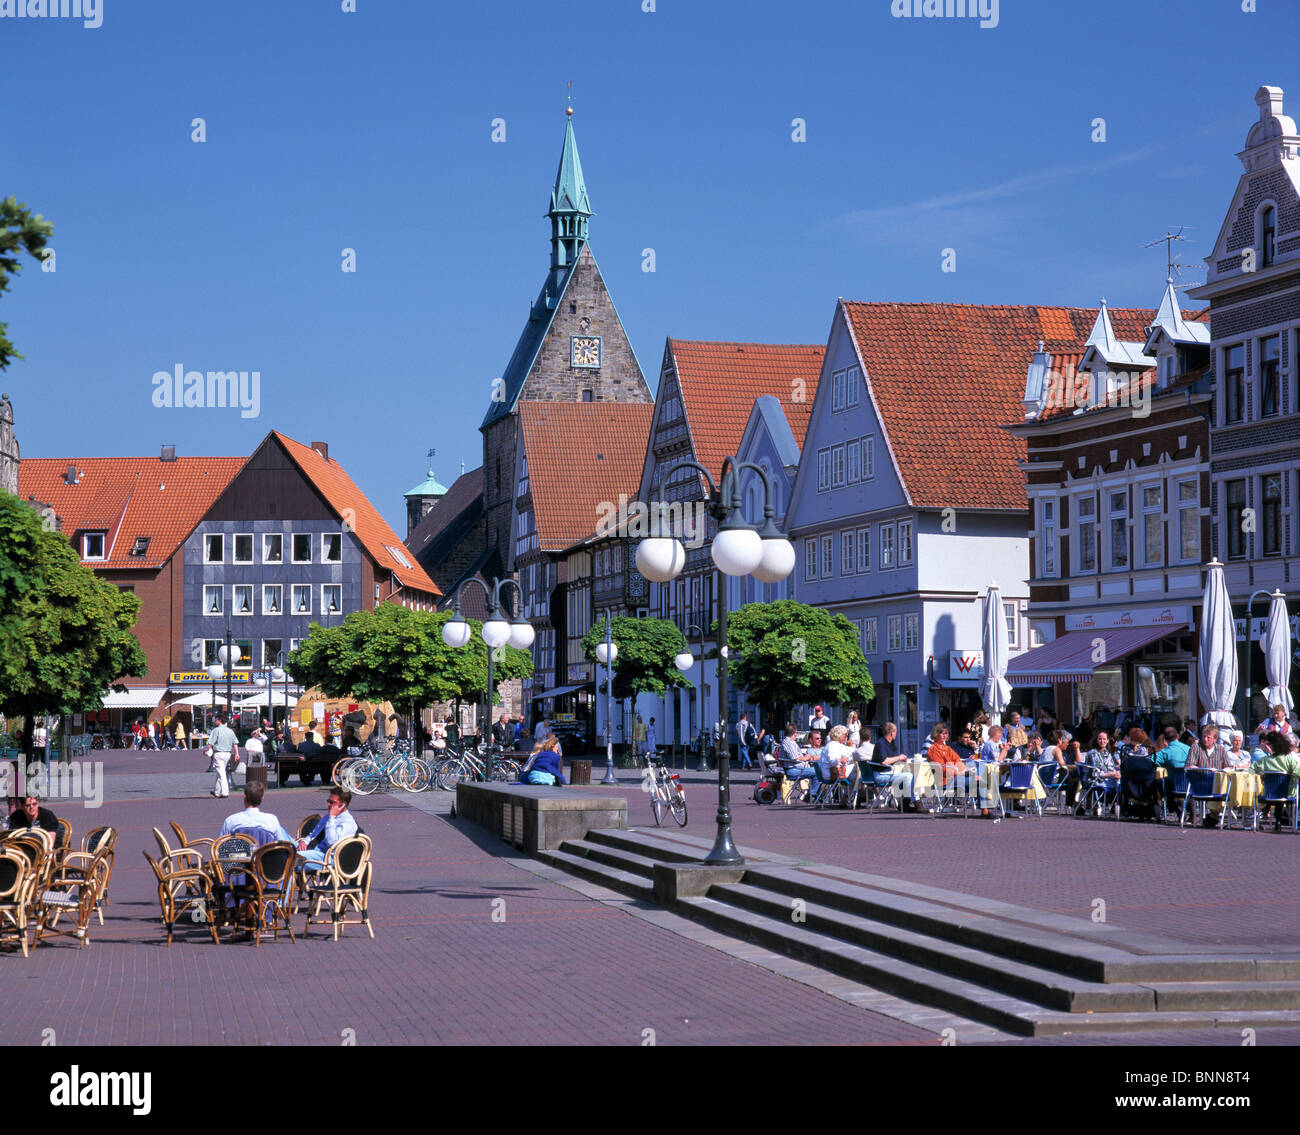 Germany Stadthagen Schaumburg Forest Lower Saxony market place St. Martin Church evangelic church residential buildings people Stock Photo